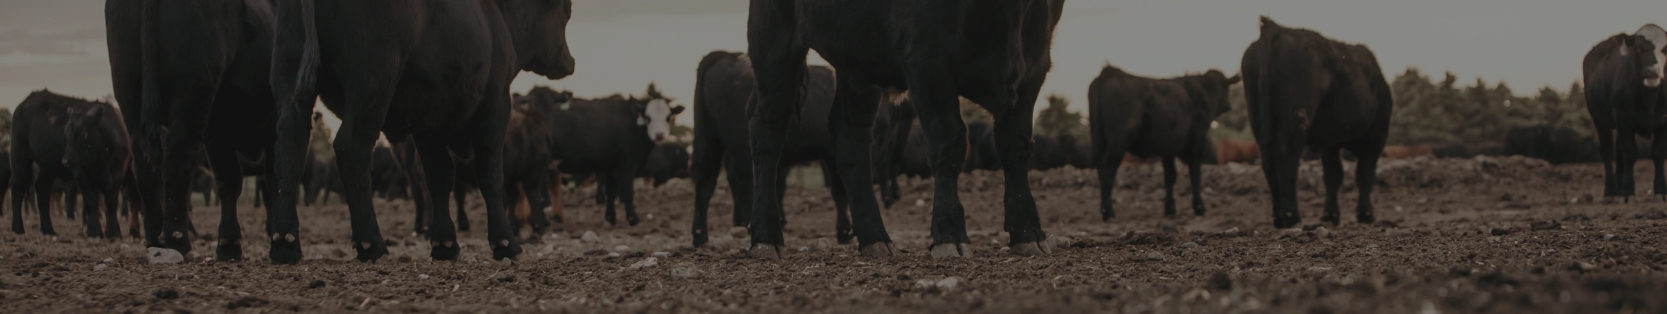 A group of black cattle standing together in a field